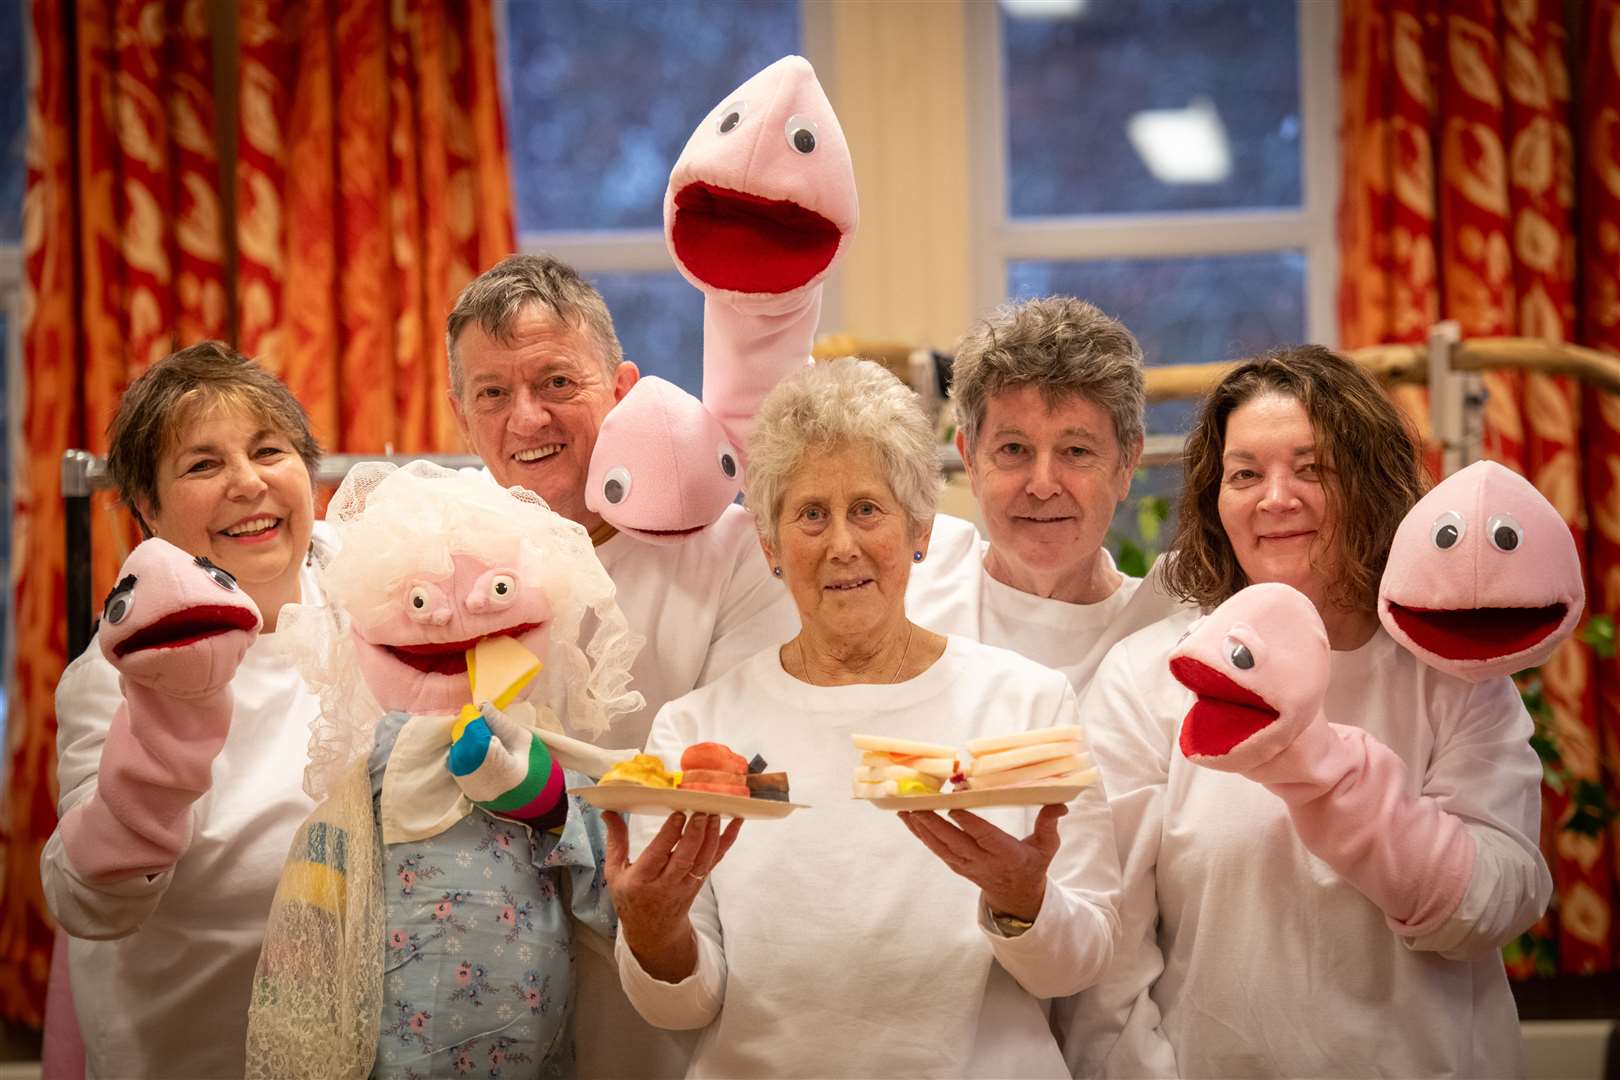 Puppets helped bring alive people's experiences of Covd in a special project. Picture: Callum Mackay